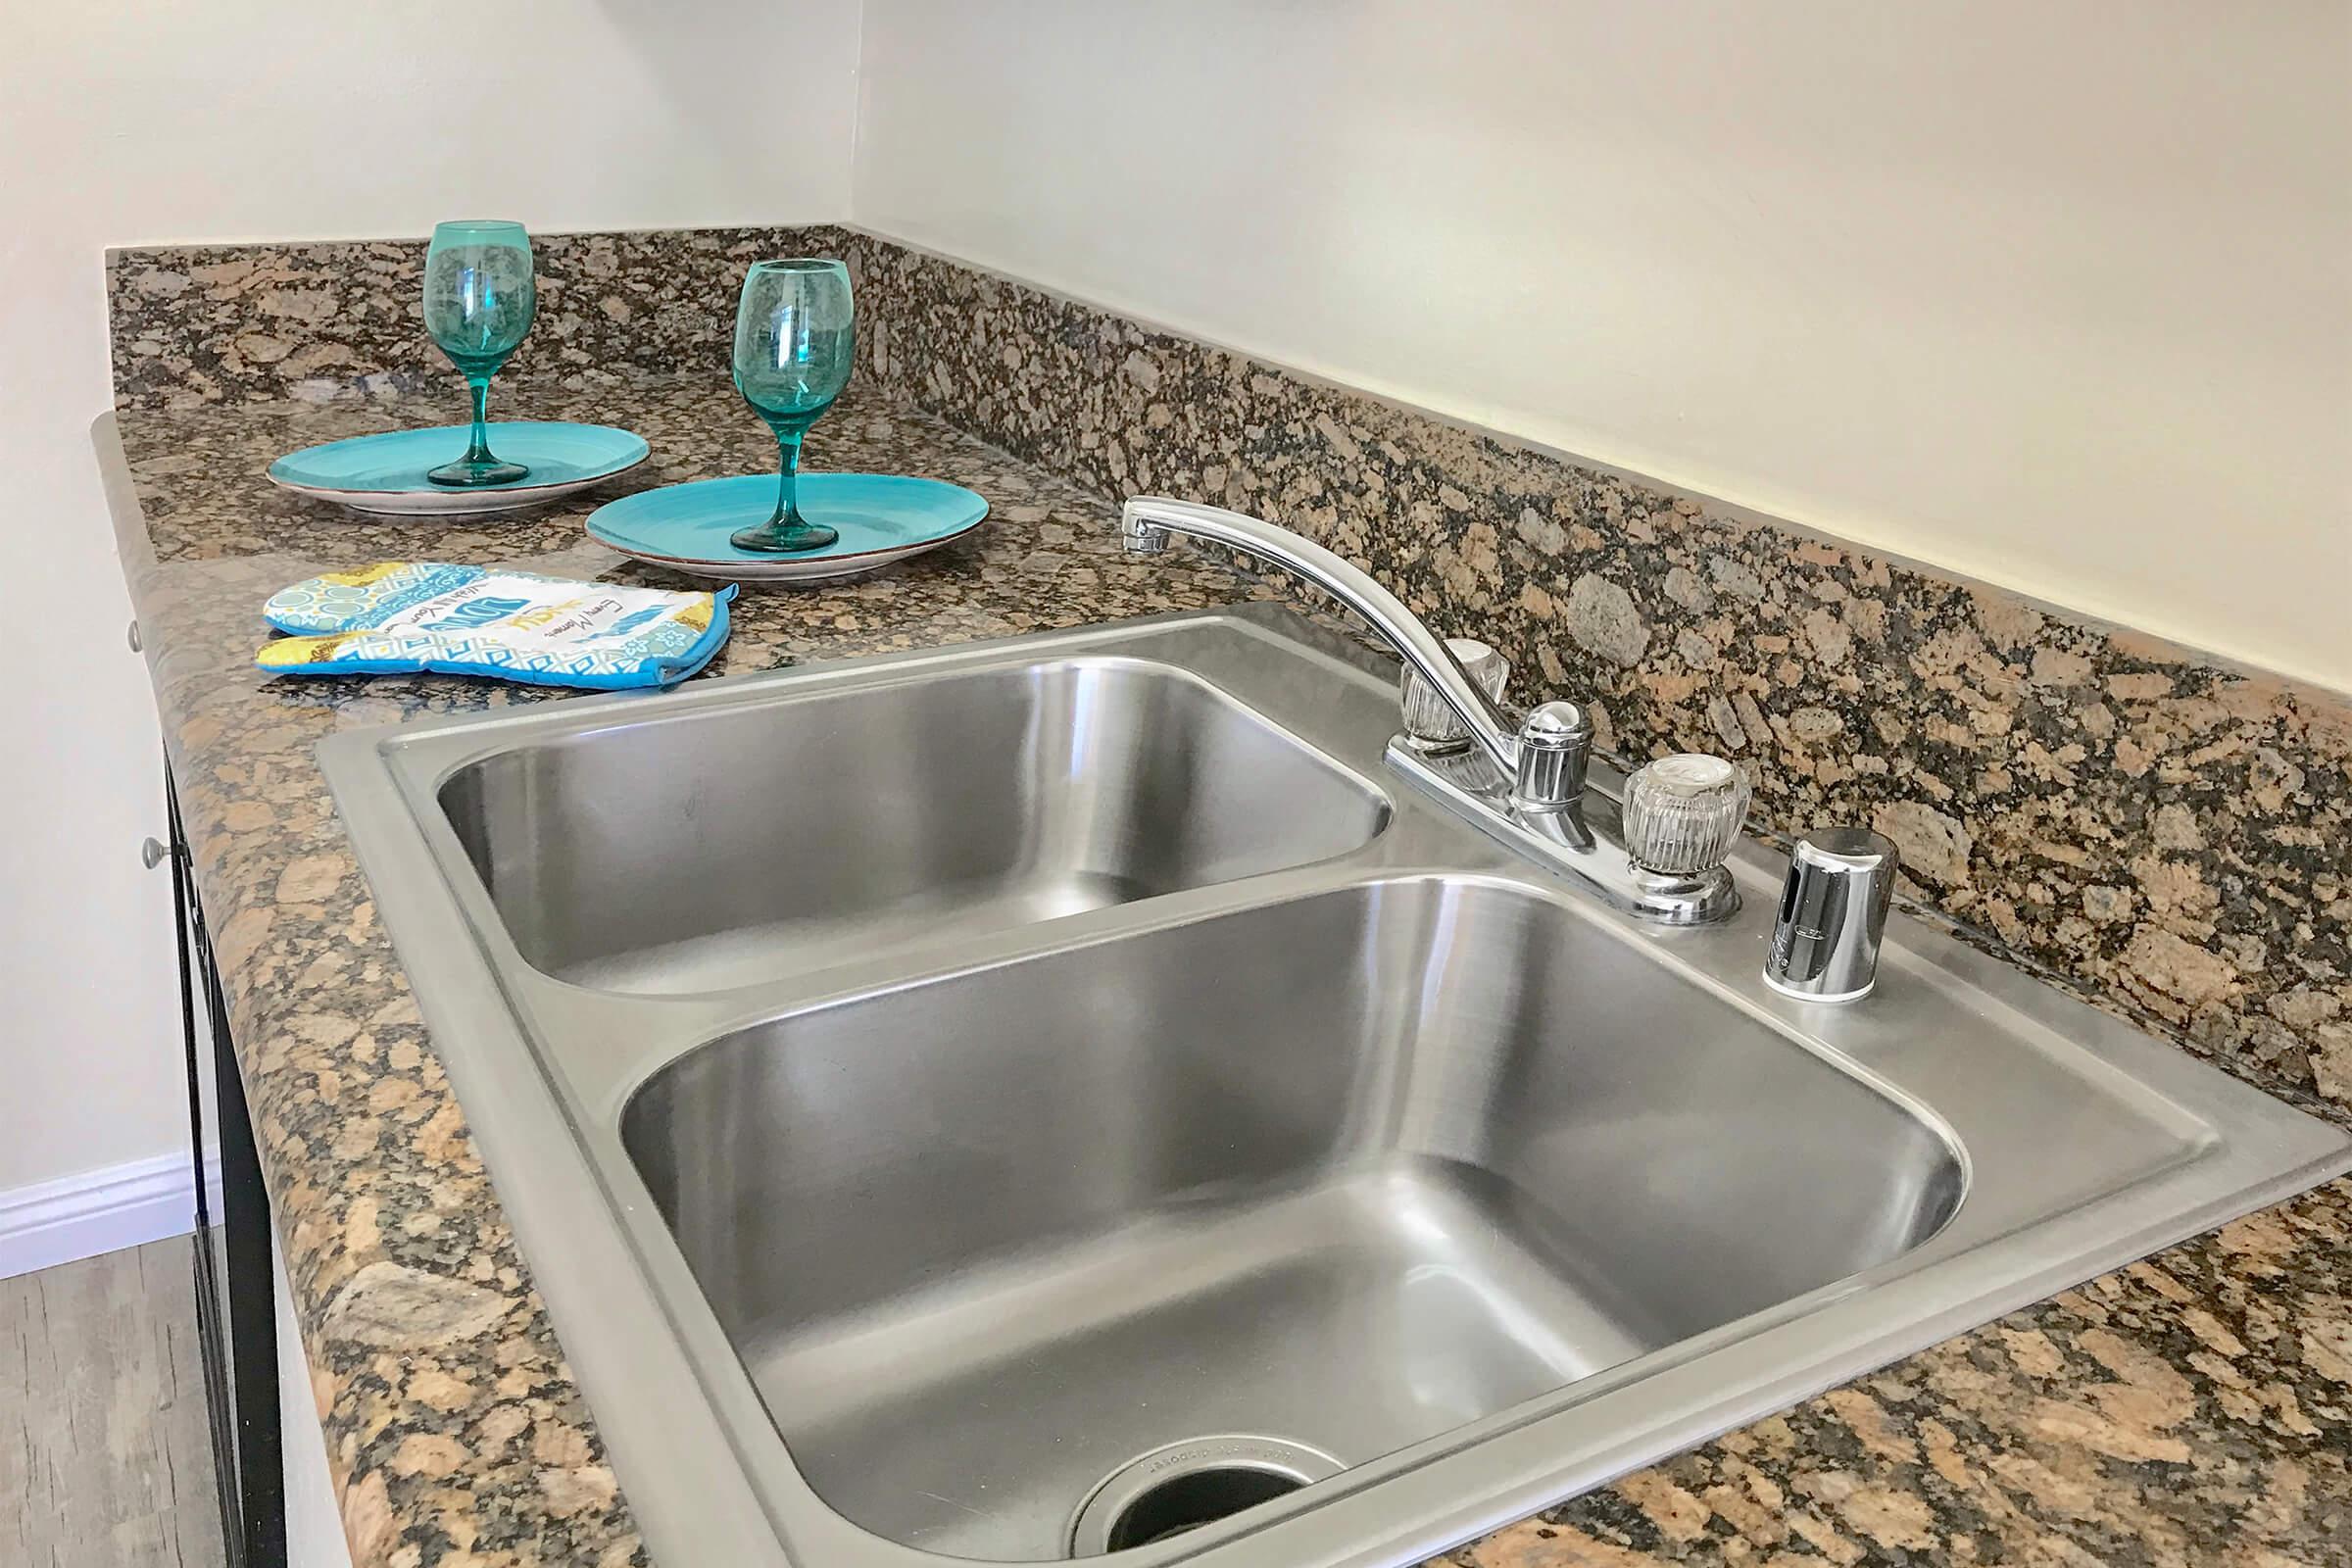 Kitchen sink with two teal plates and glasses